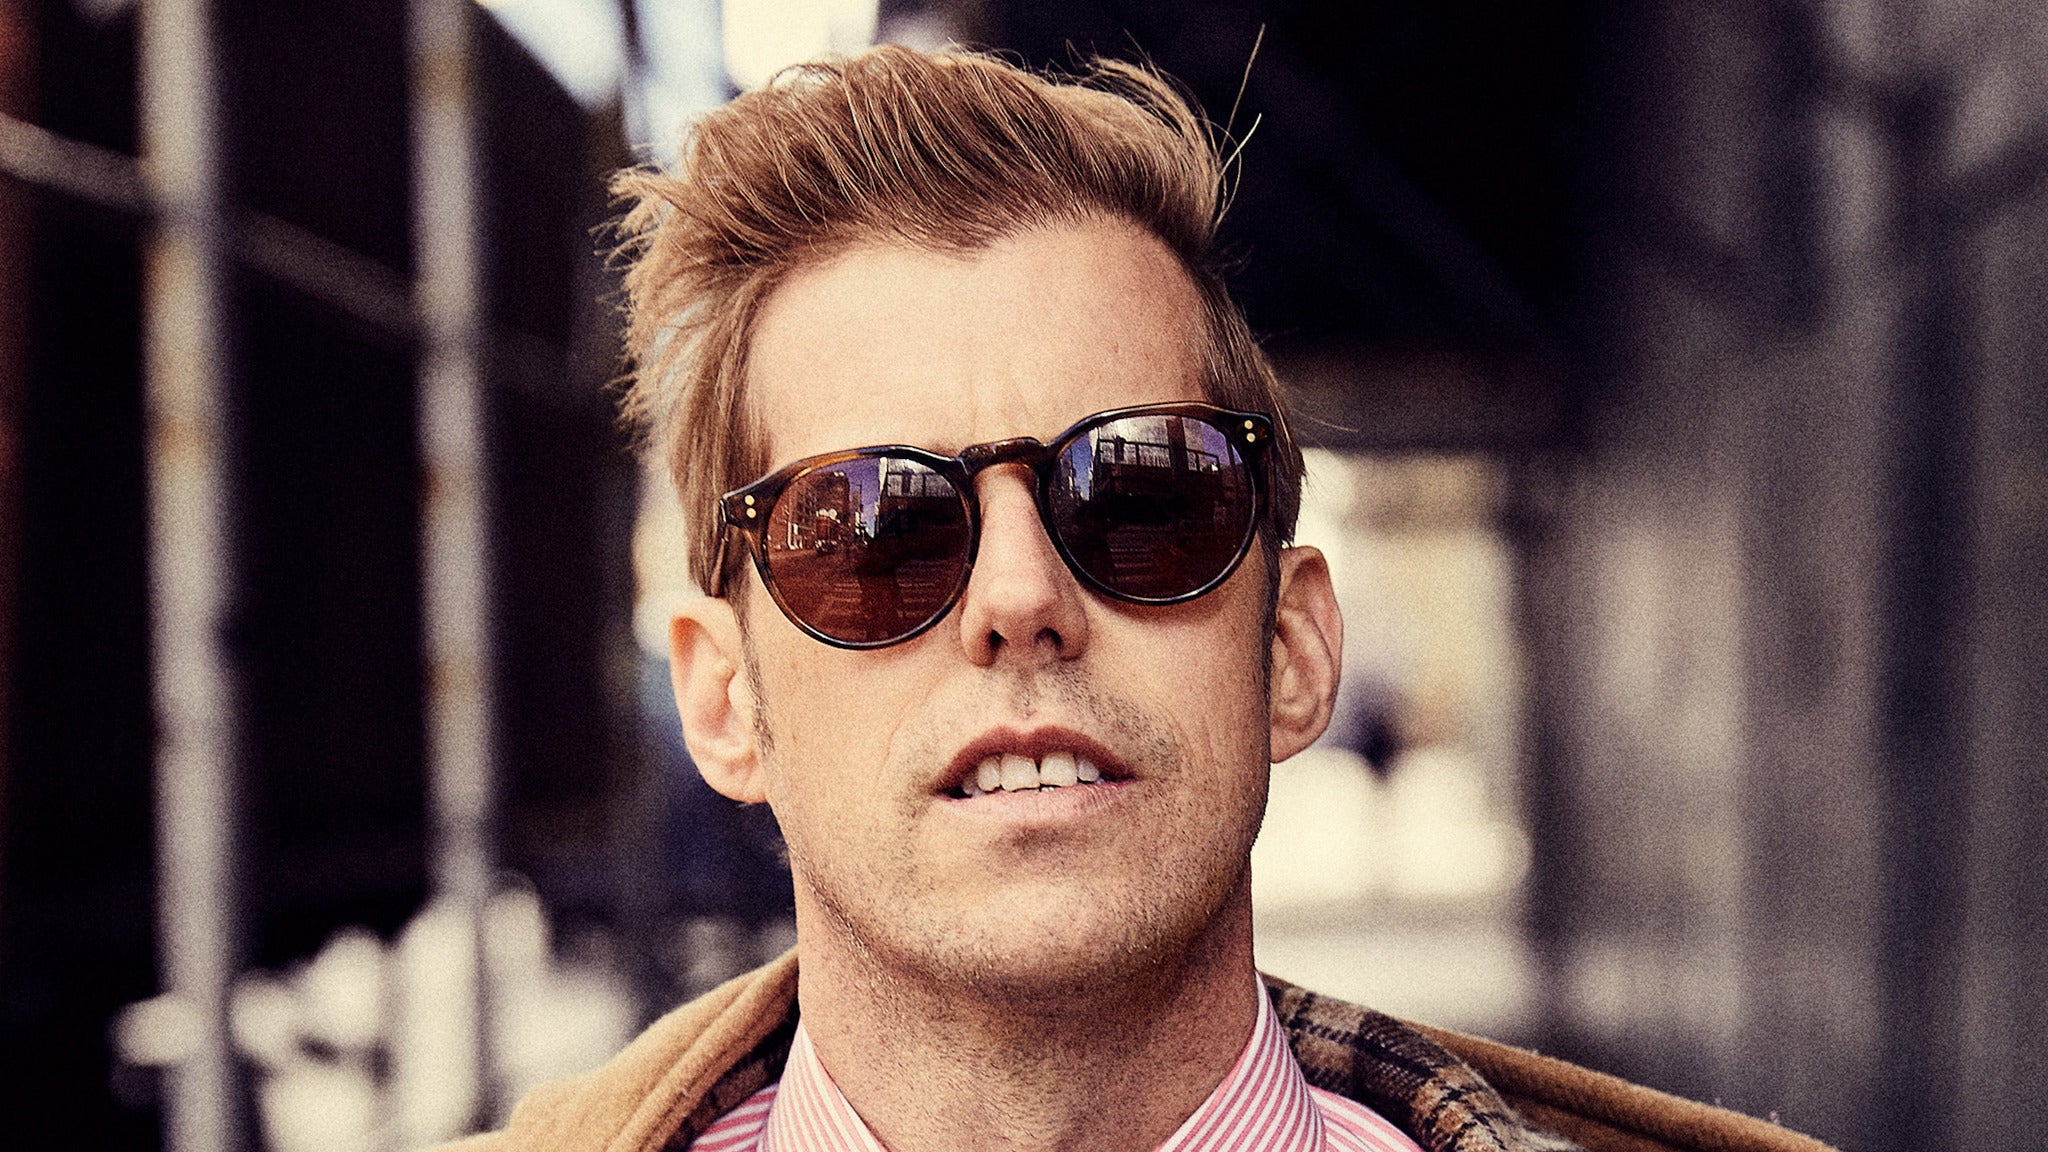 Andrew McMahon in the Wilderness in Seattle promo photo for Artist presale offer code